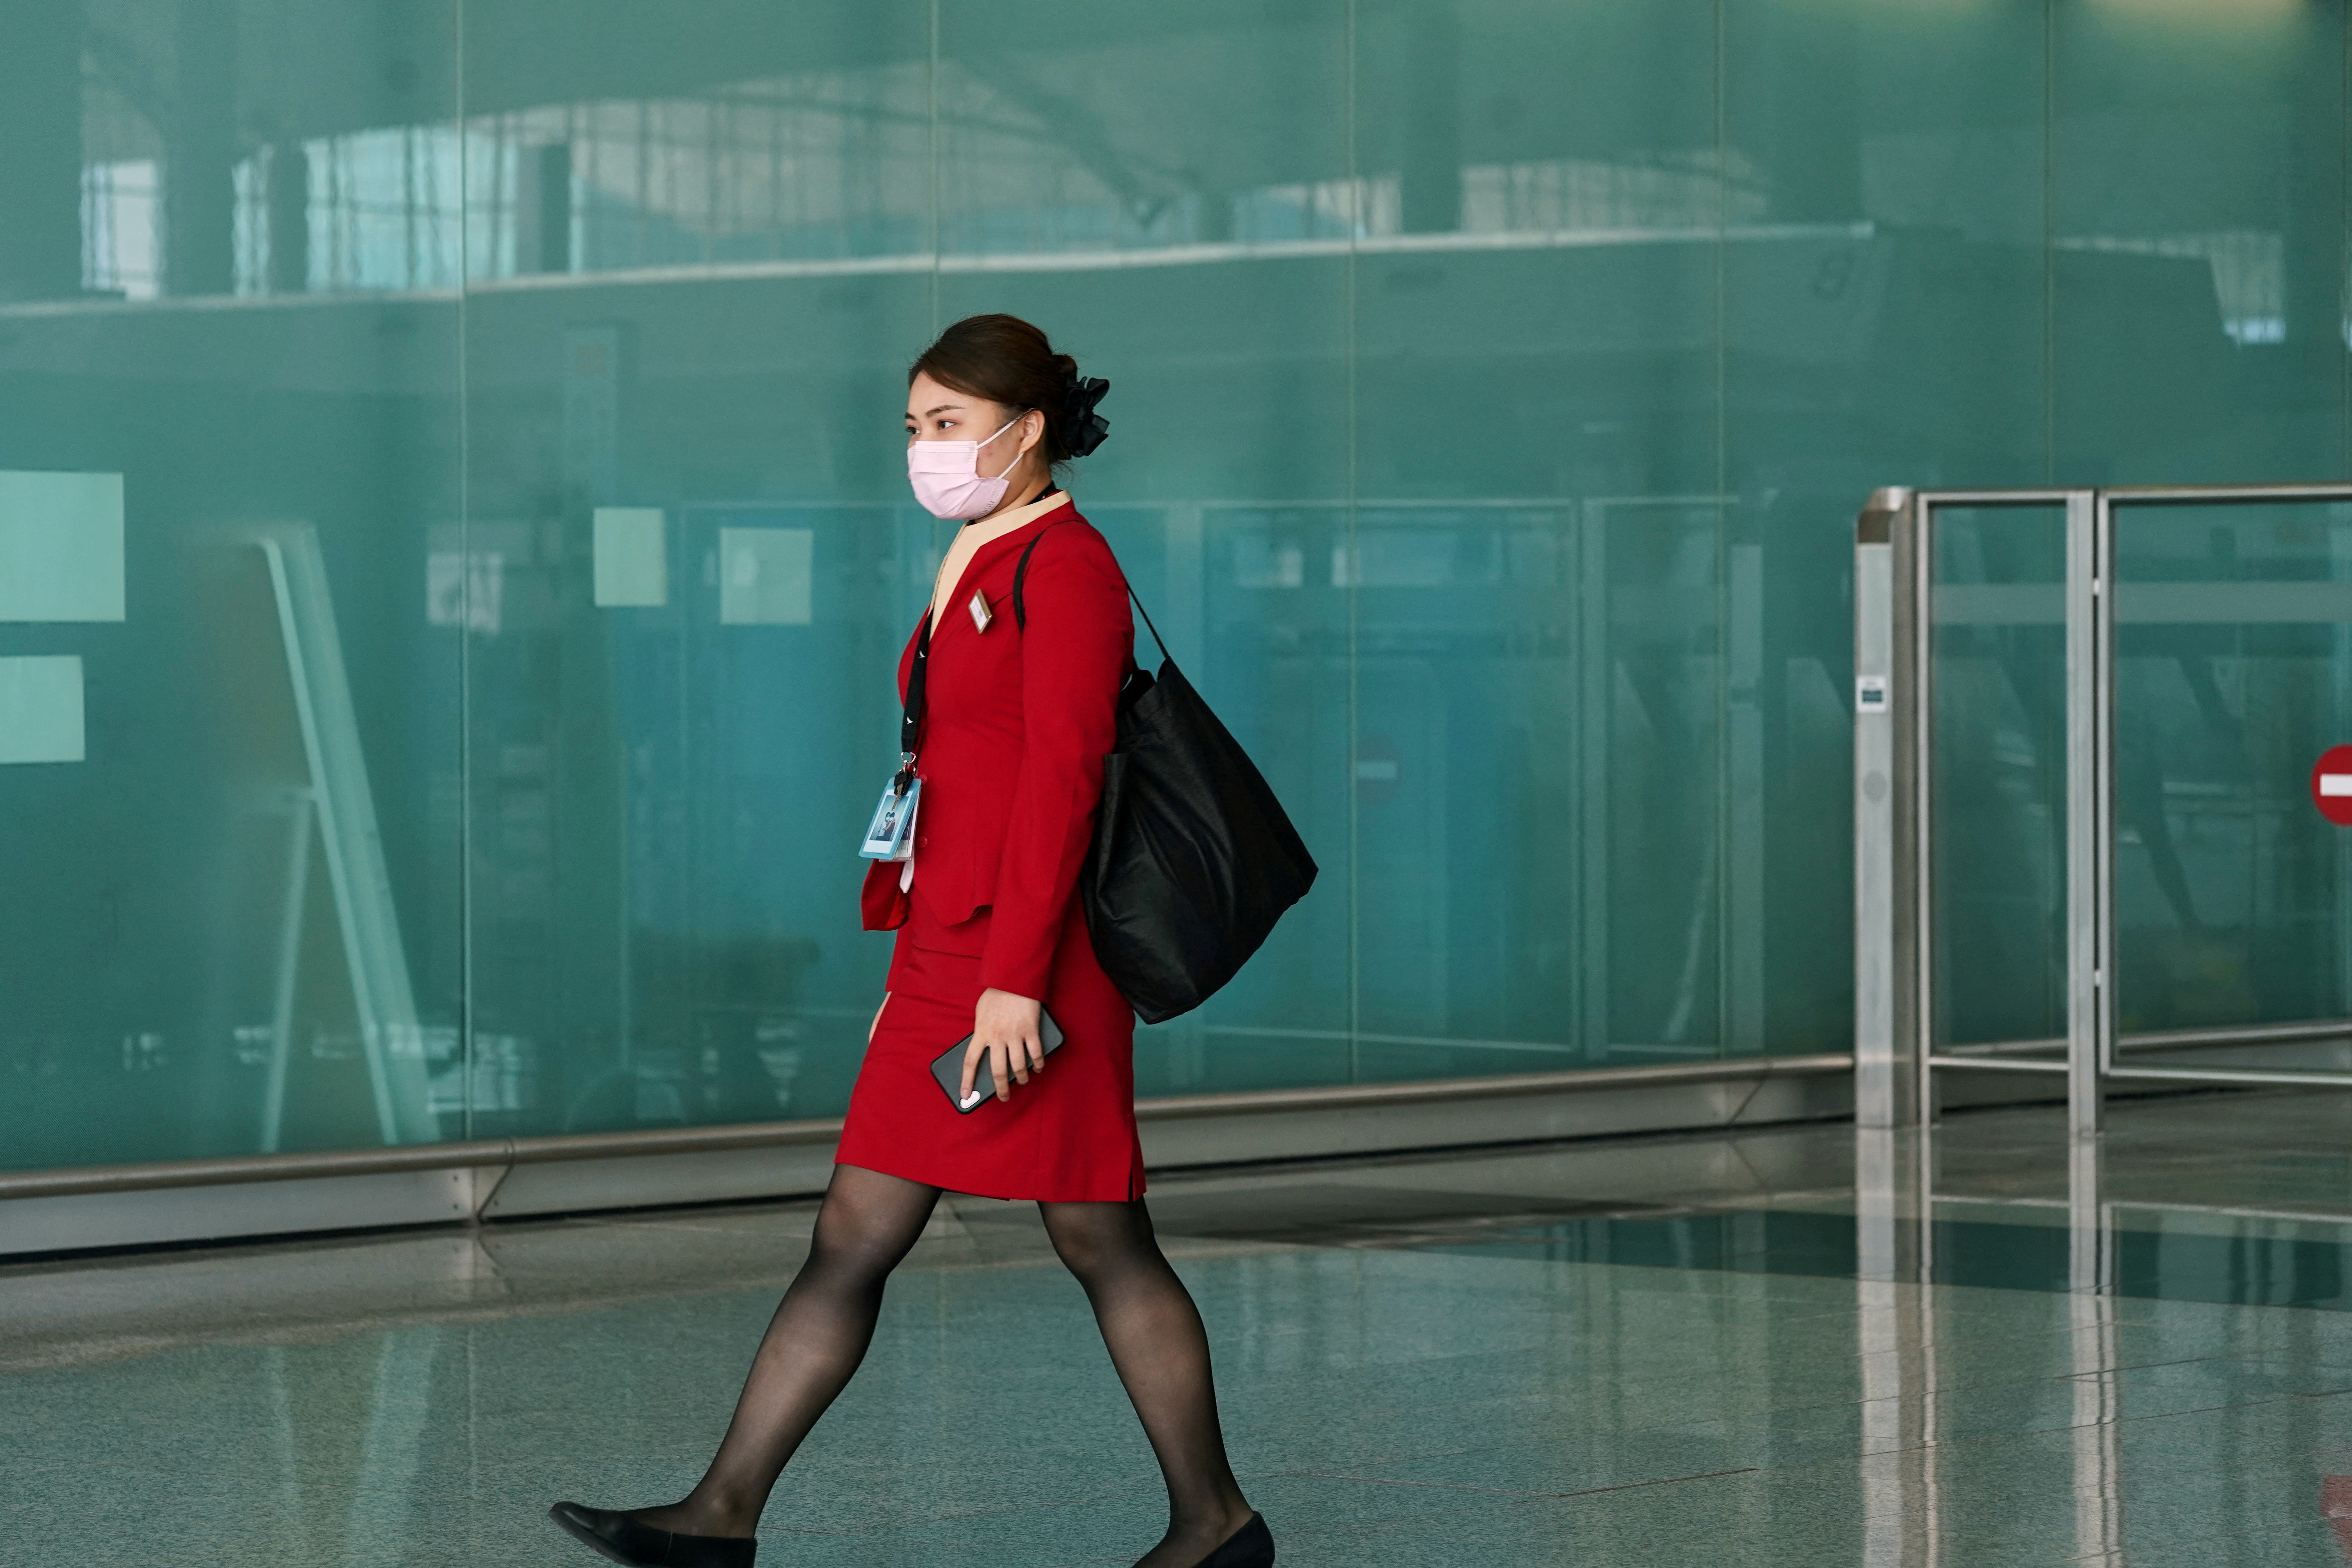 Cathay needs to boost staff morale, union says, after 